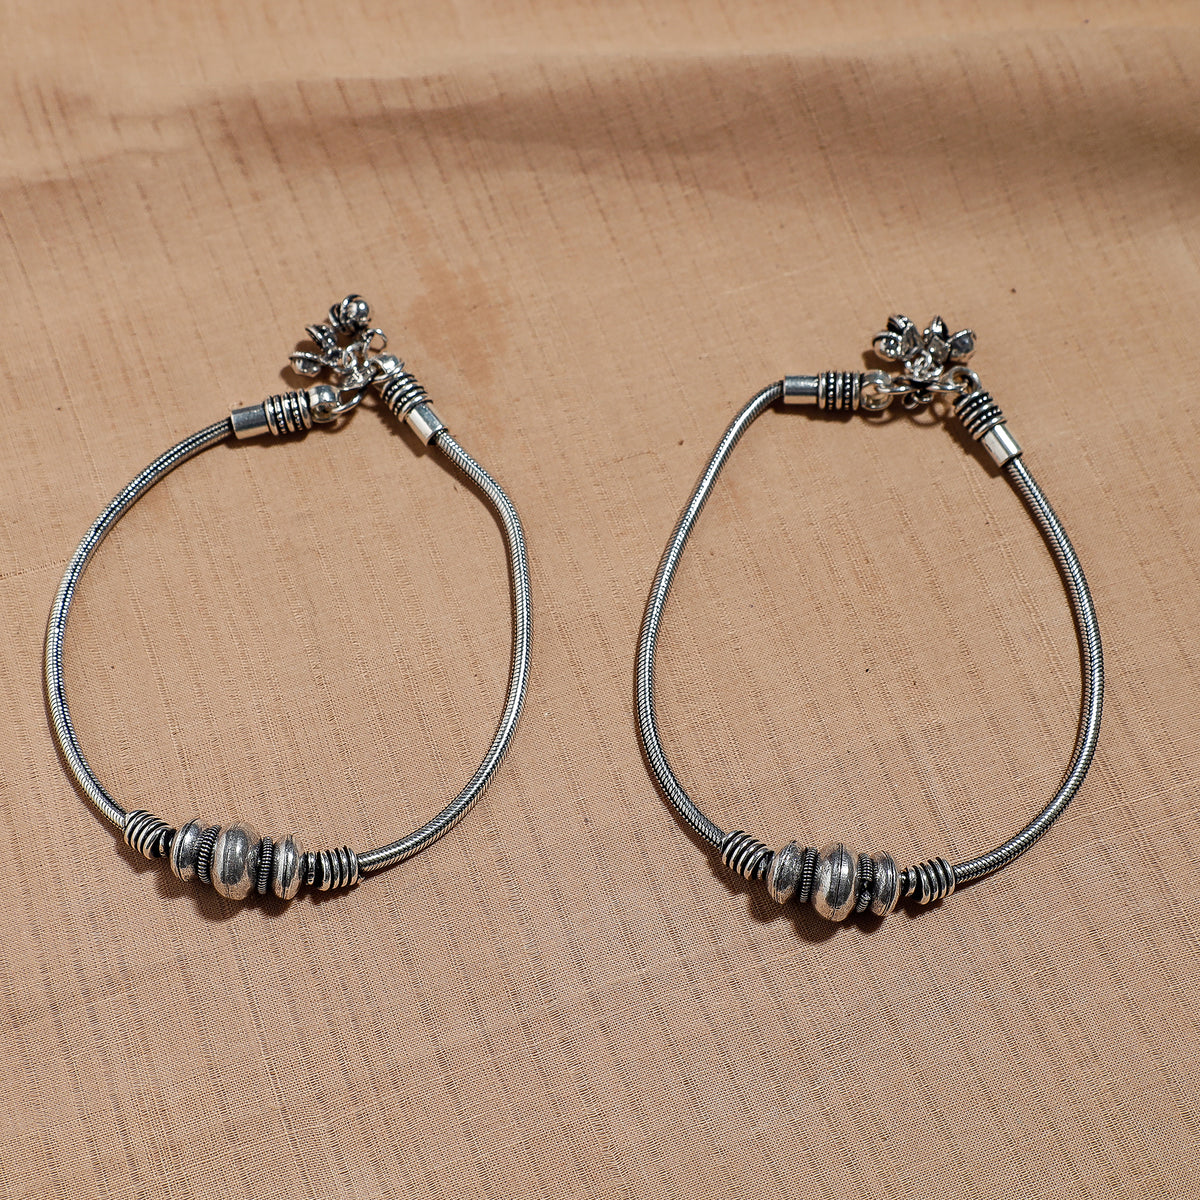 Antique Finish Oxidised German Silver Anklets